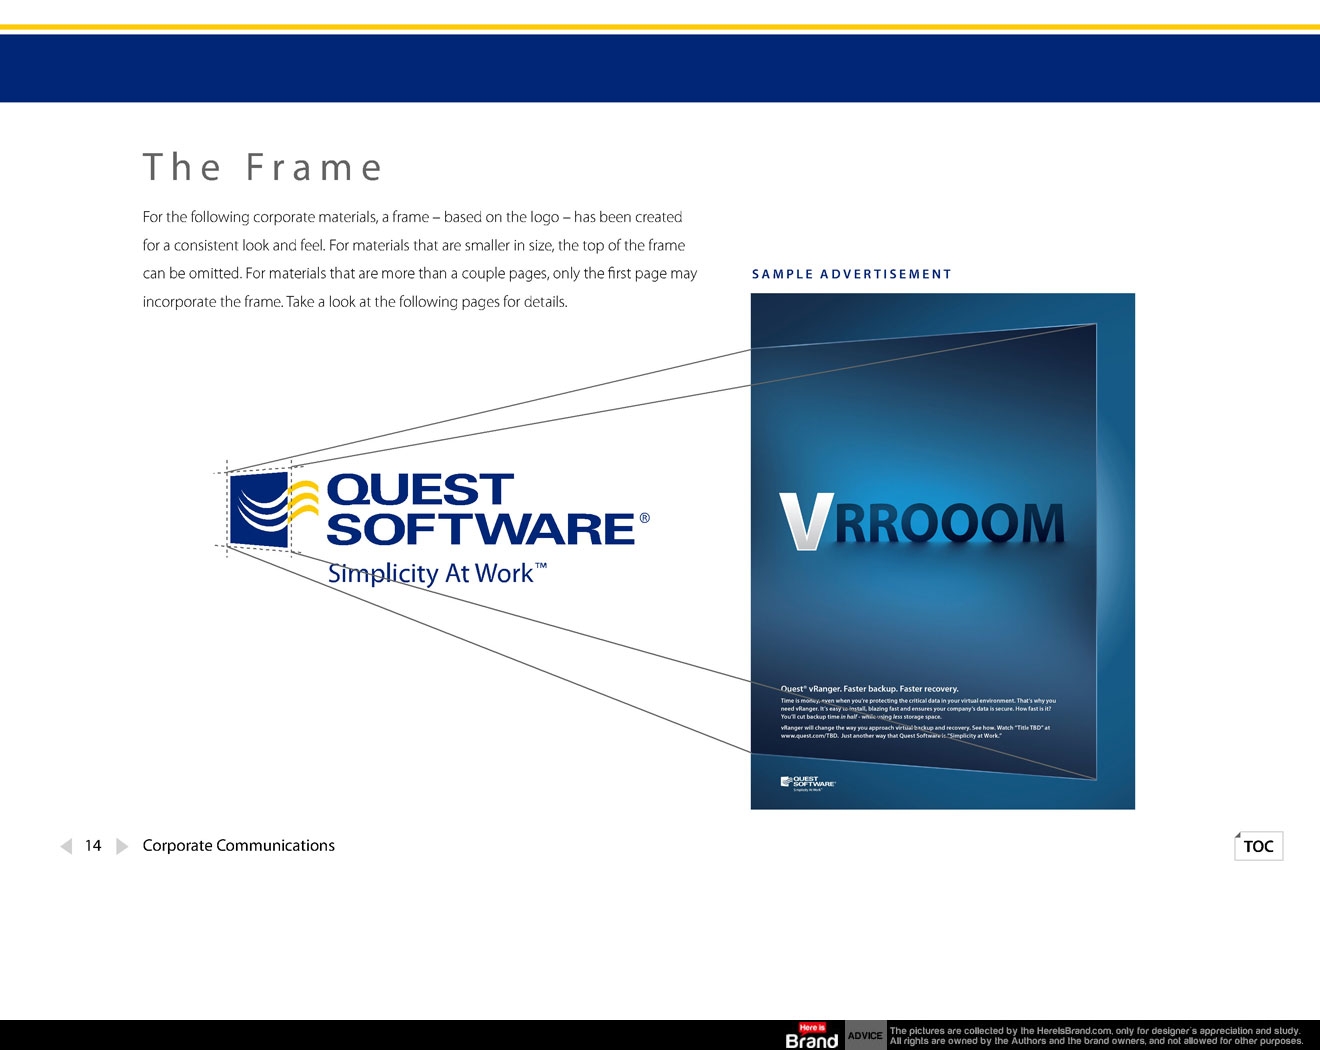 Quest Software branding and graphic standards